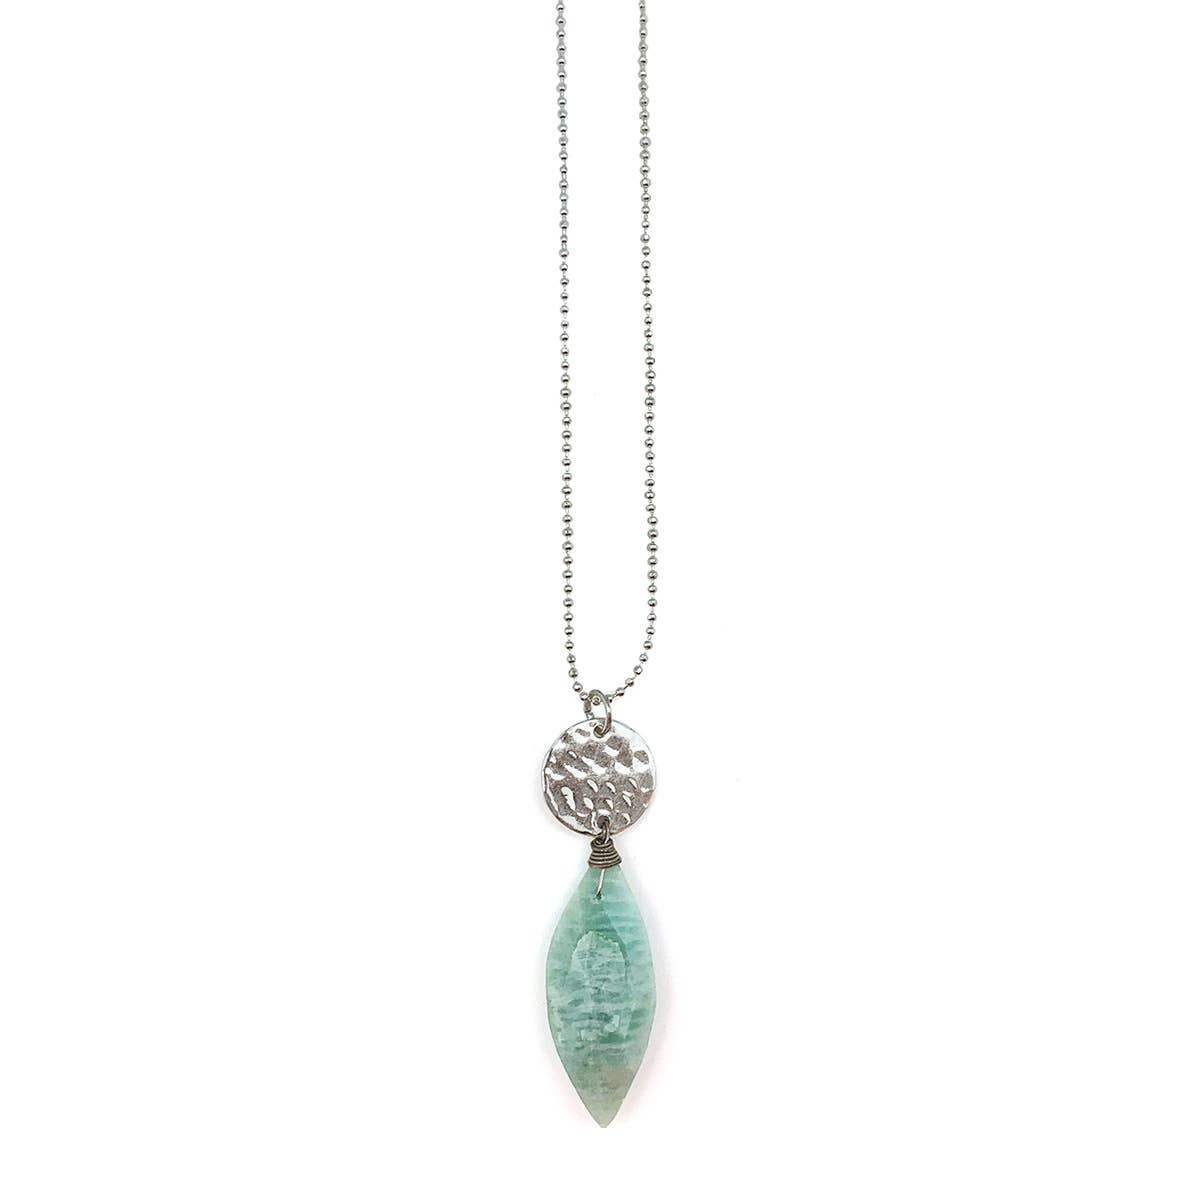 Akriti Silver and Large Faceted Amazonite Necklace